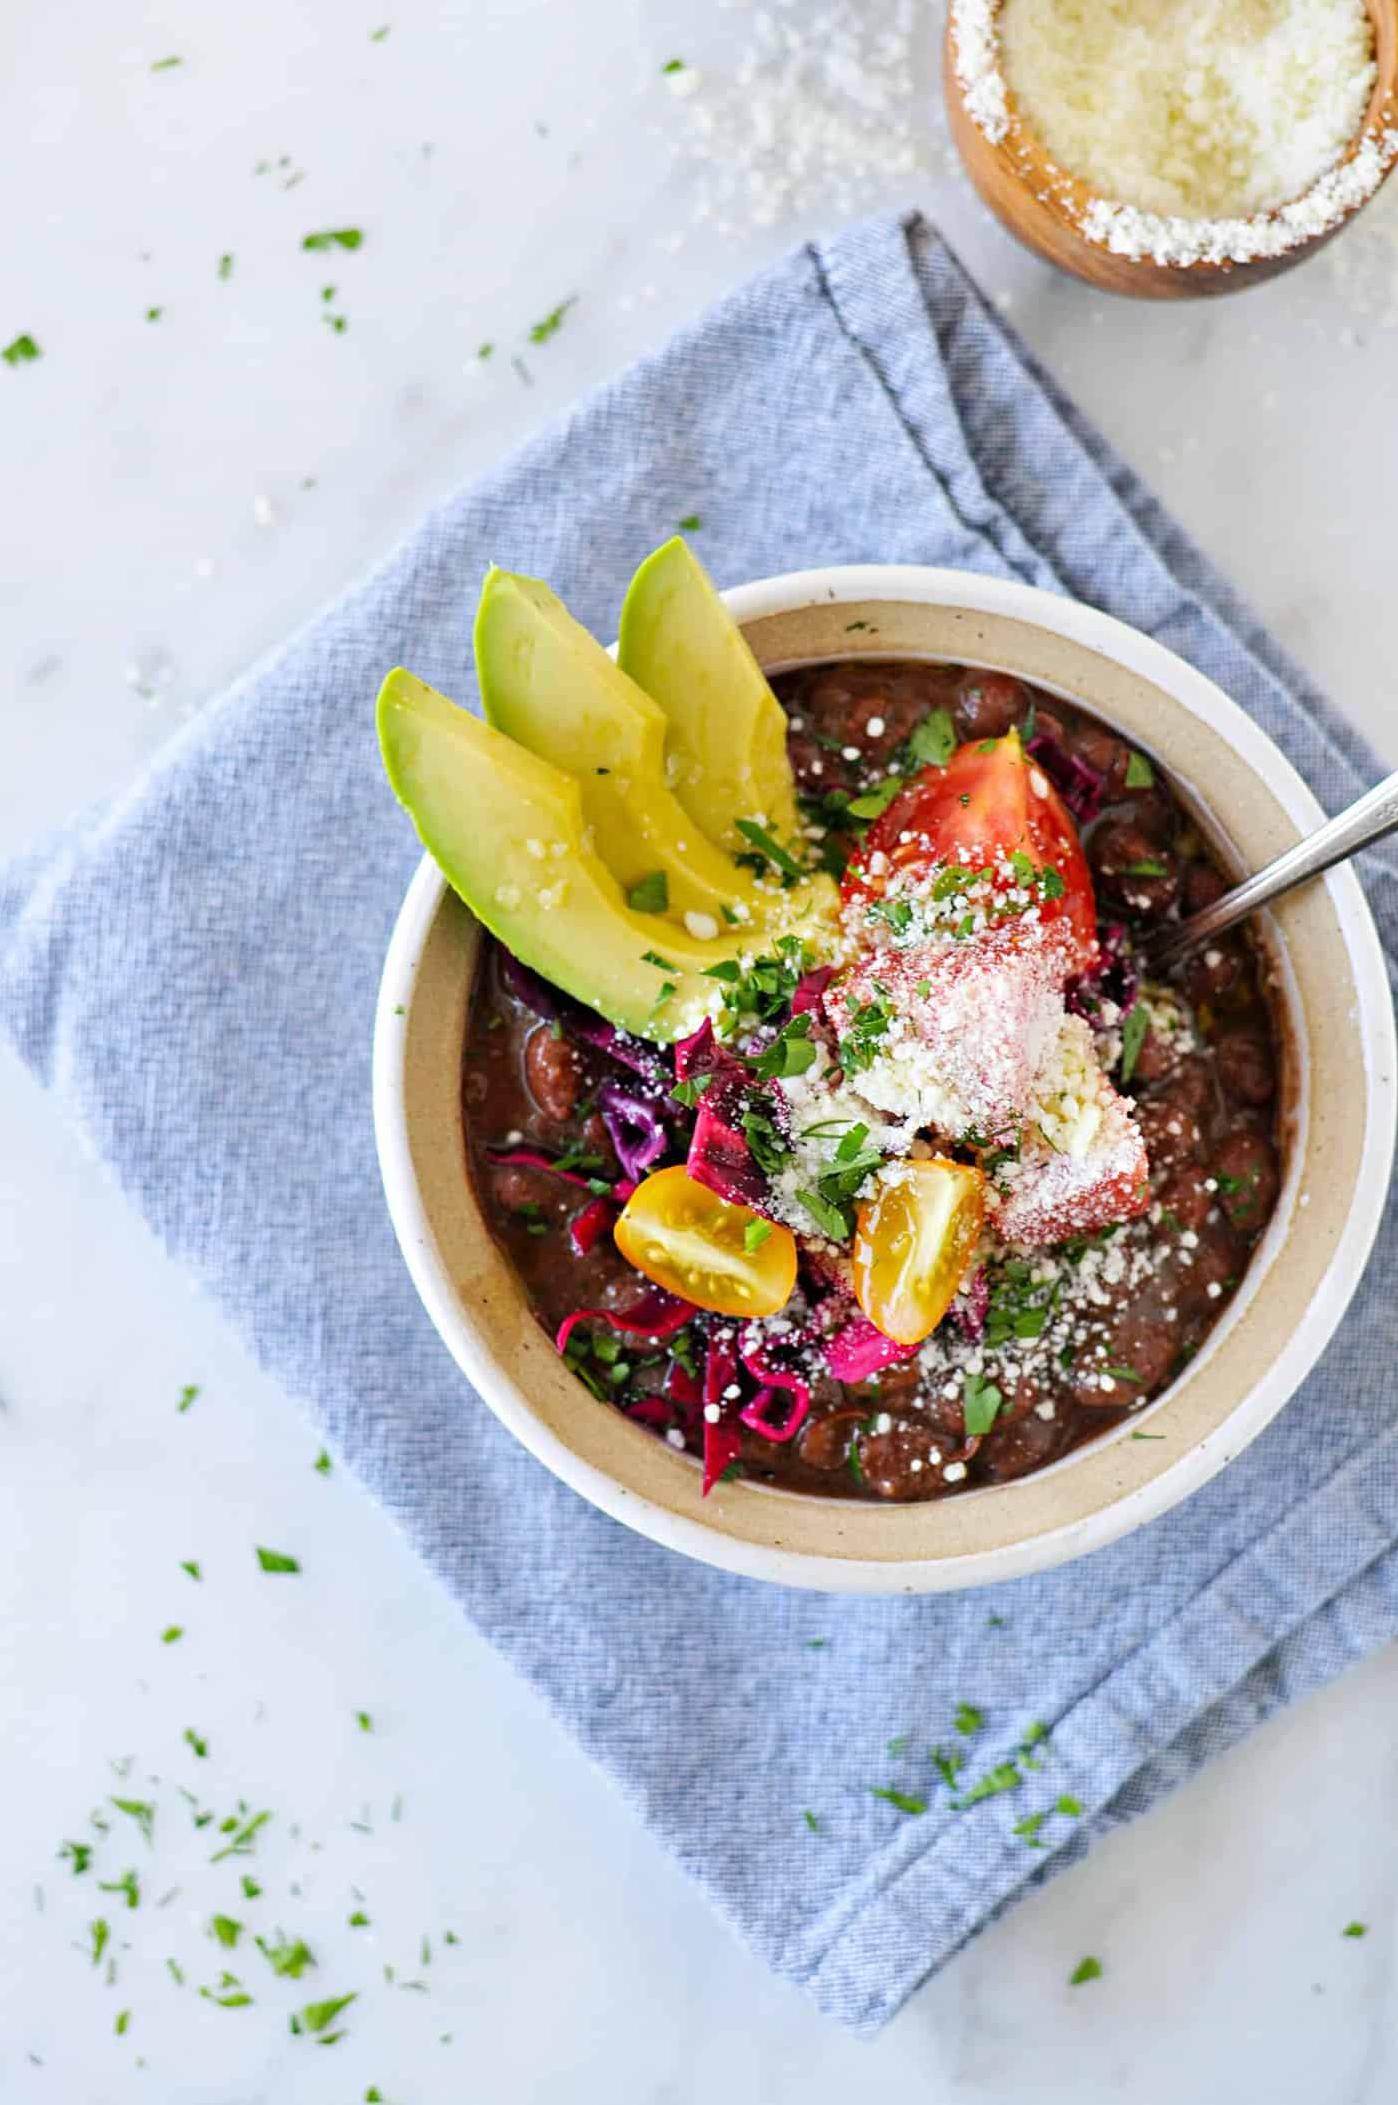  Packed with nutrient-dense ingredients, this stew is a health powerhouse.